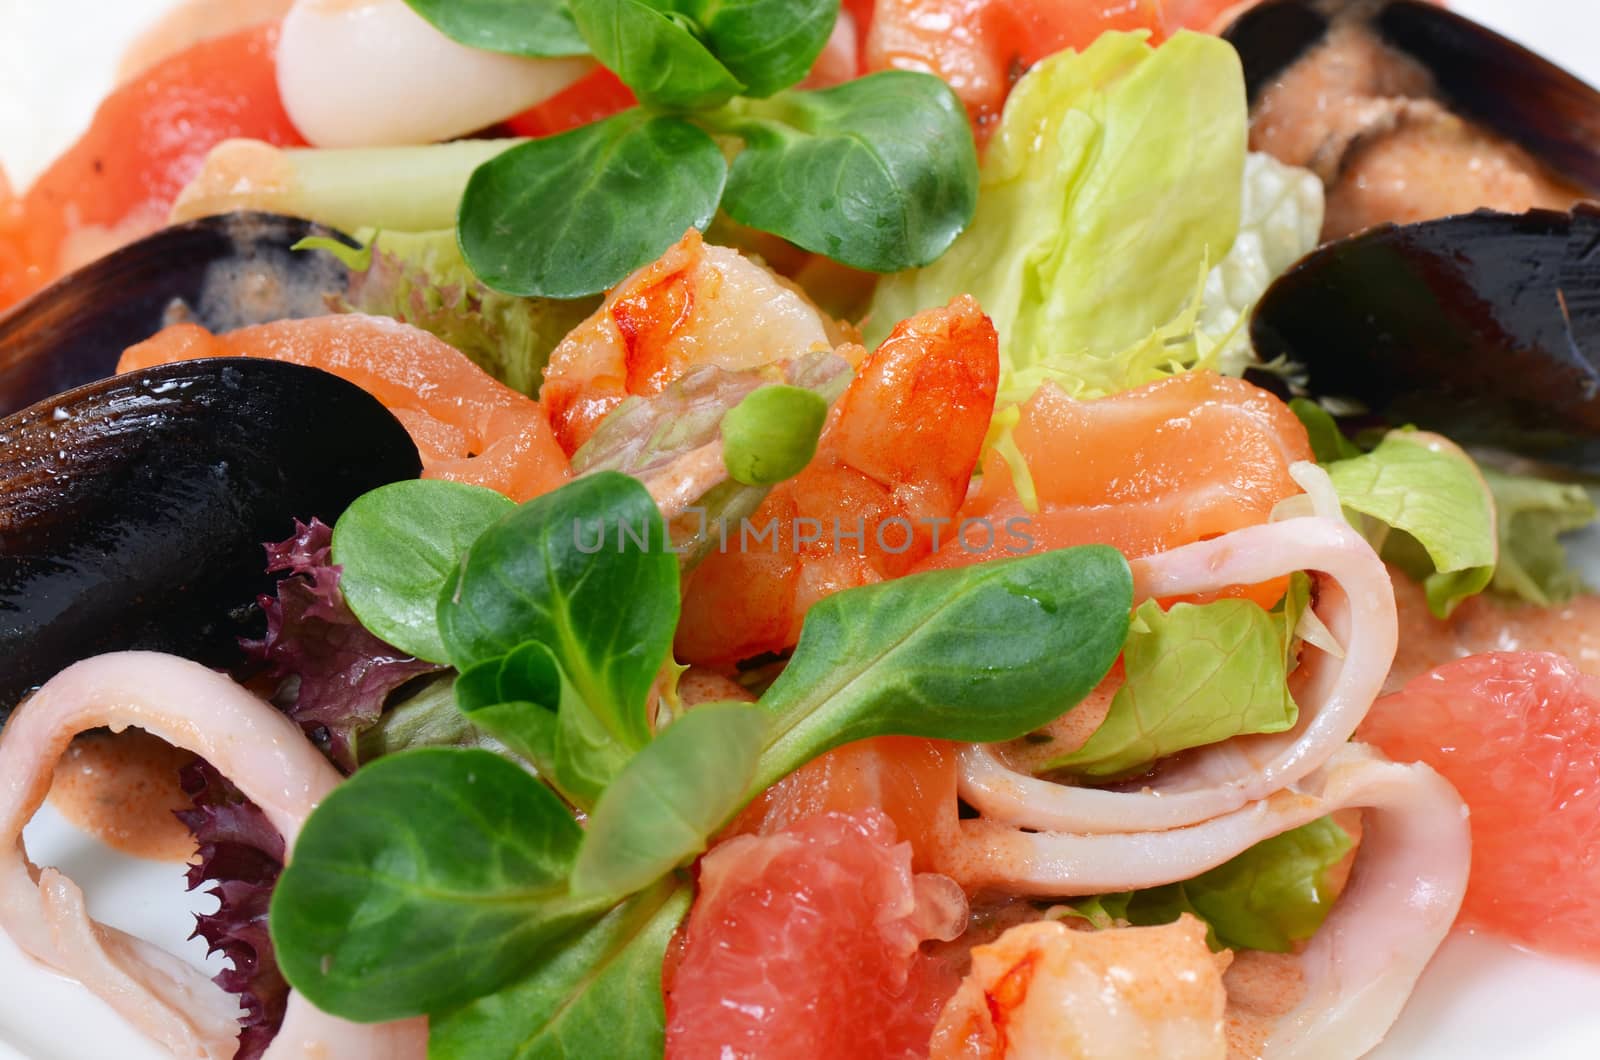 Salad from seafood and a salmon close-up